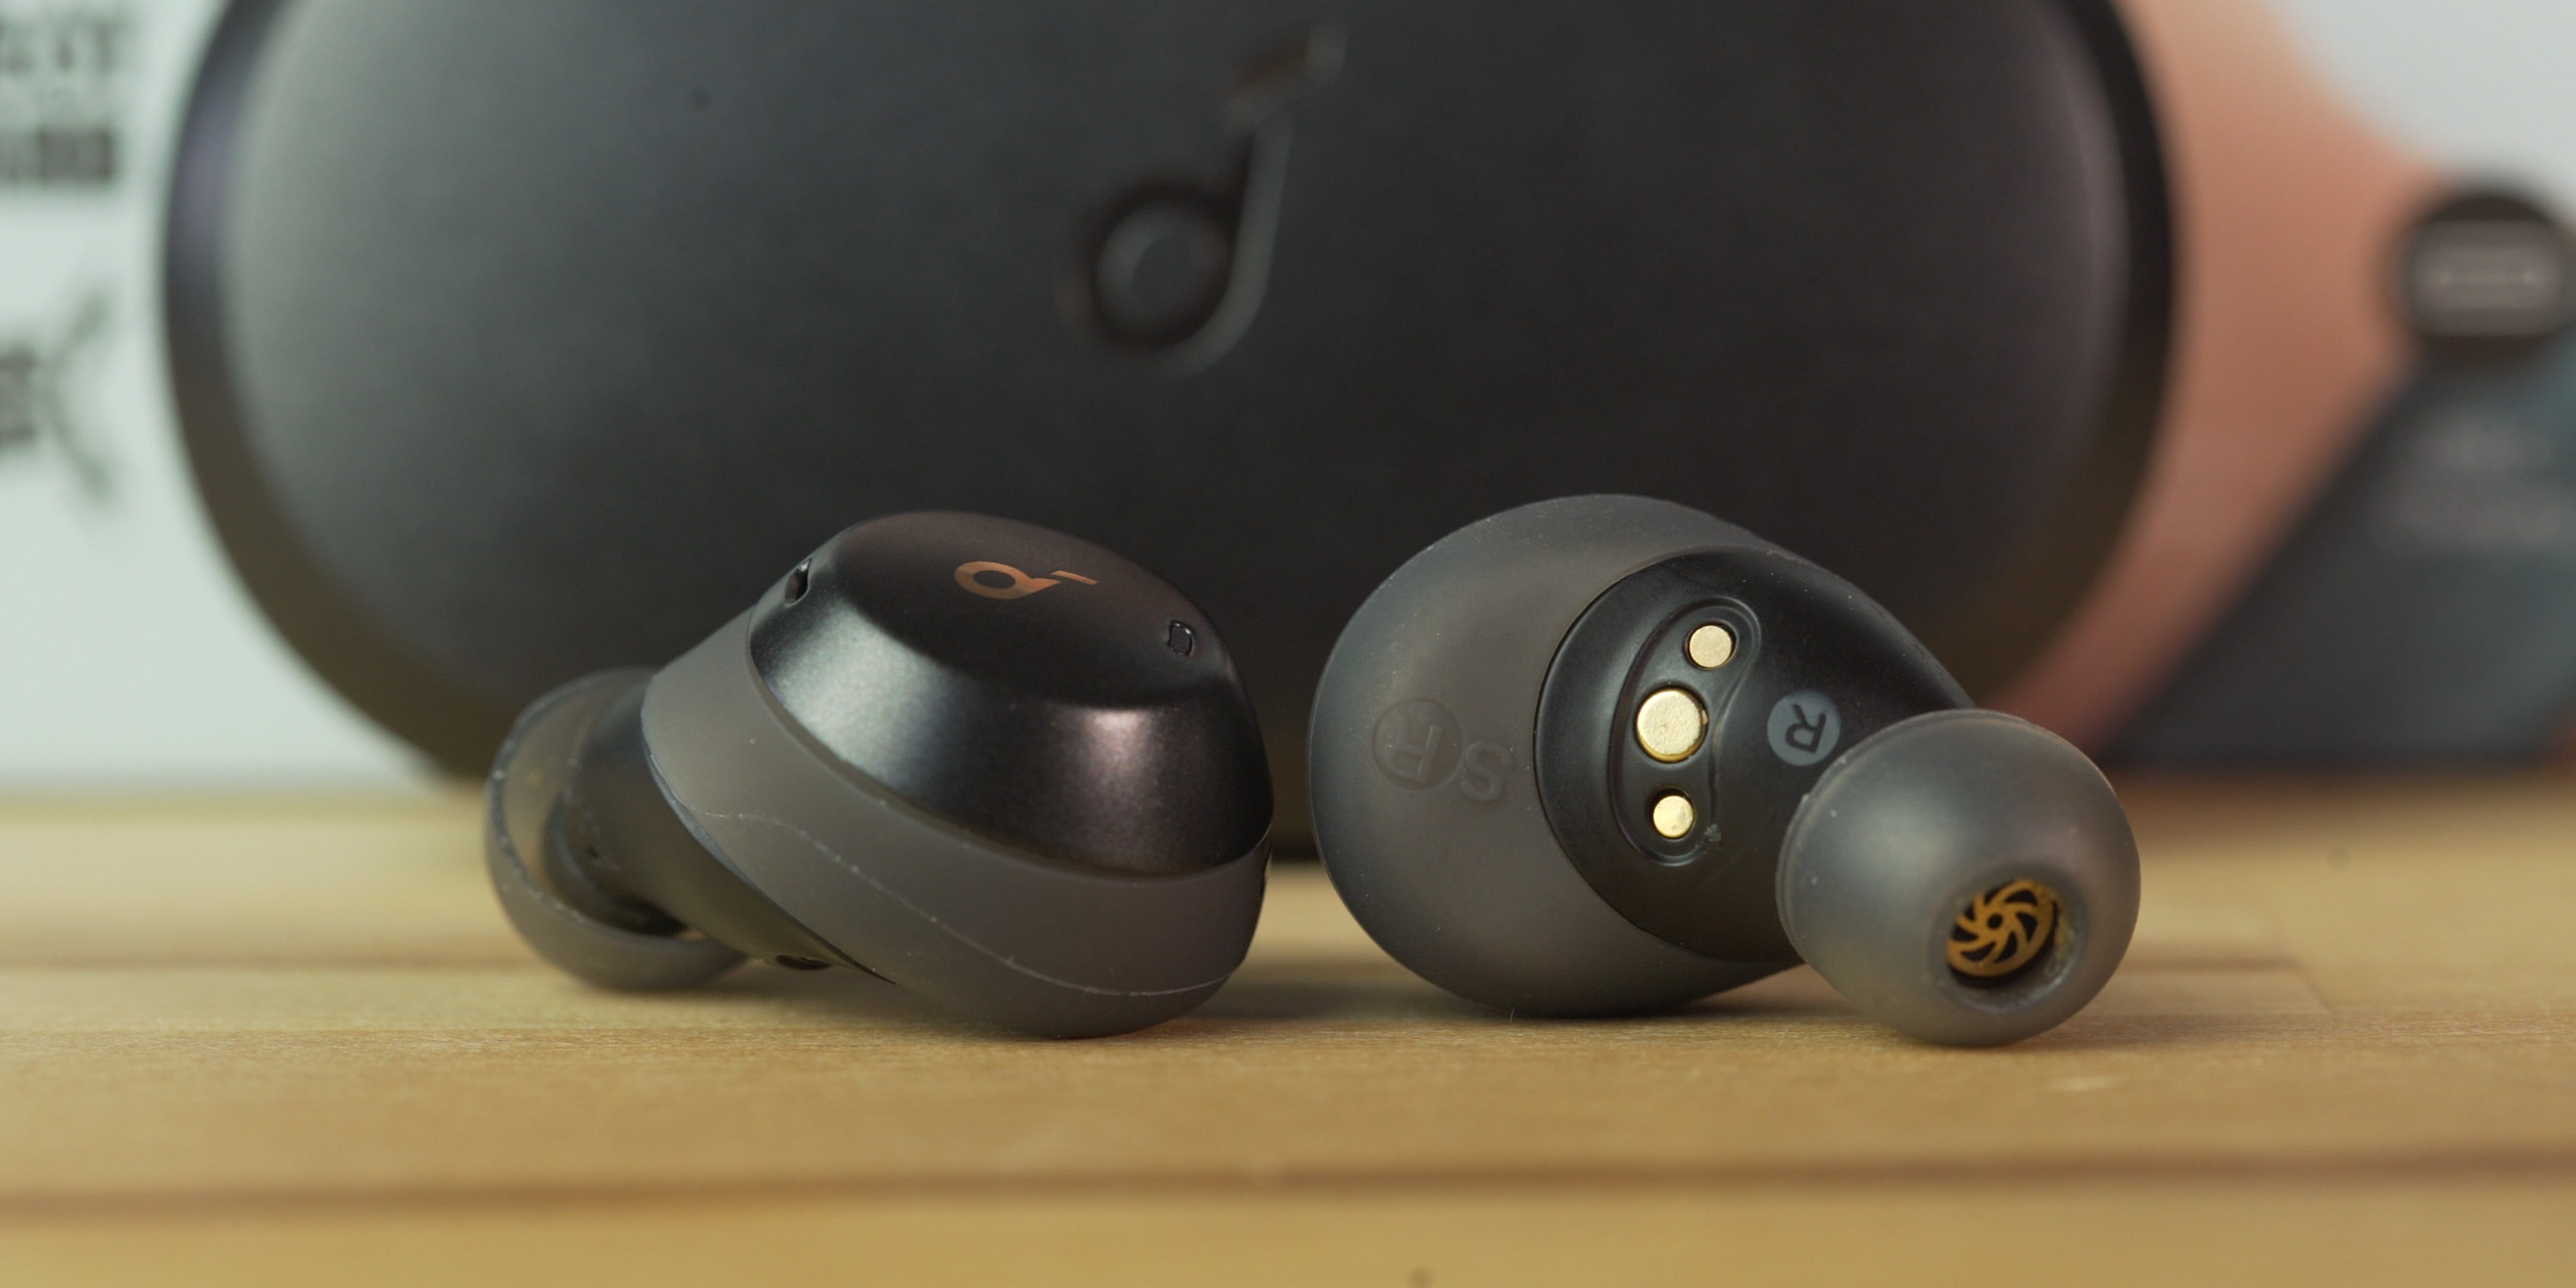 The soundcore spirit Dot 2 earbuds out of the charging case